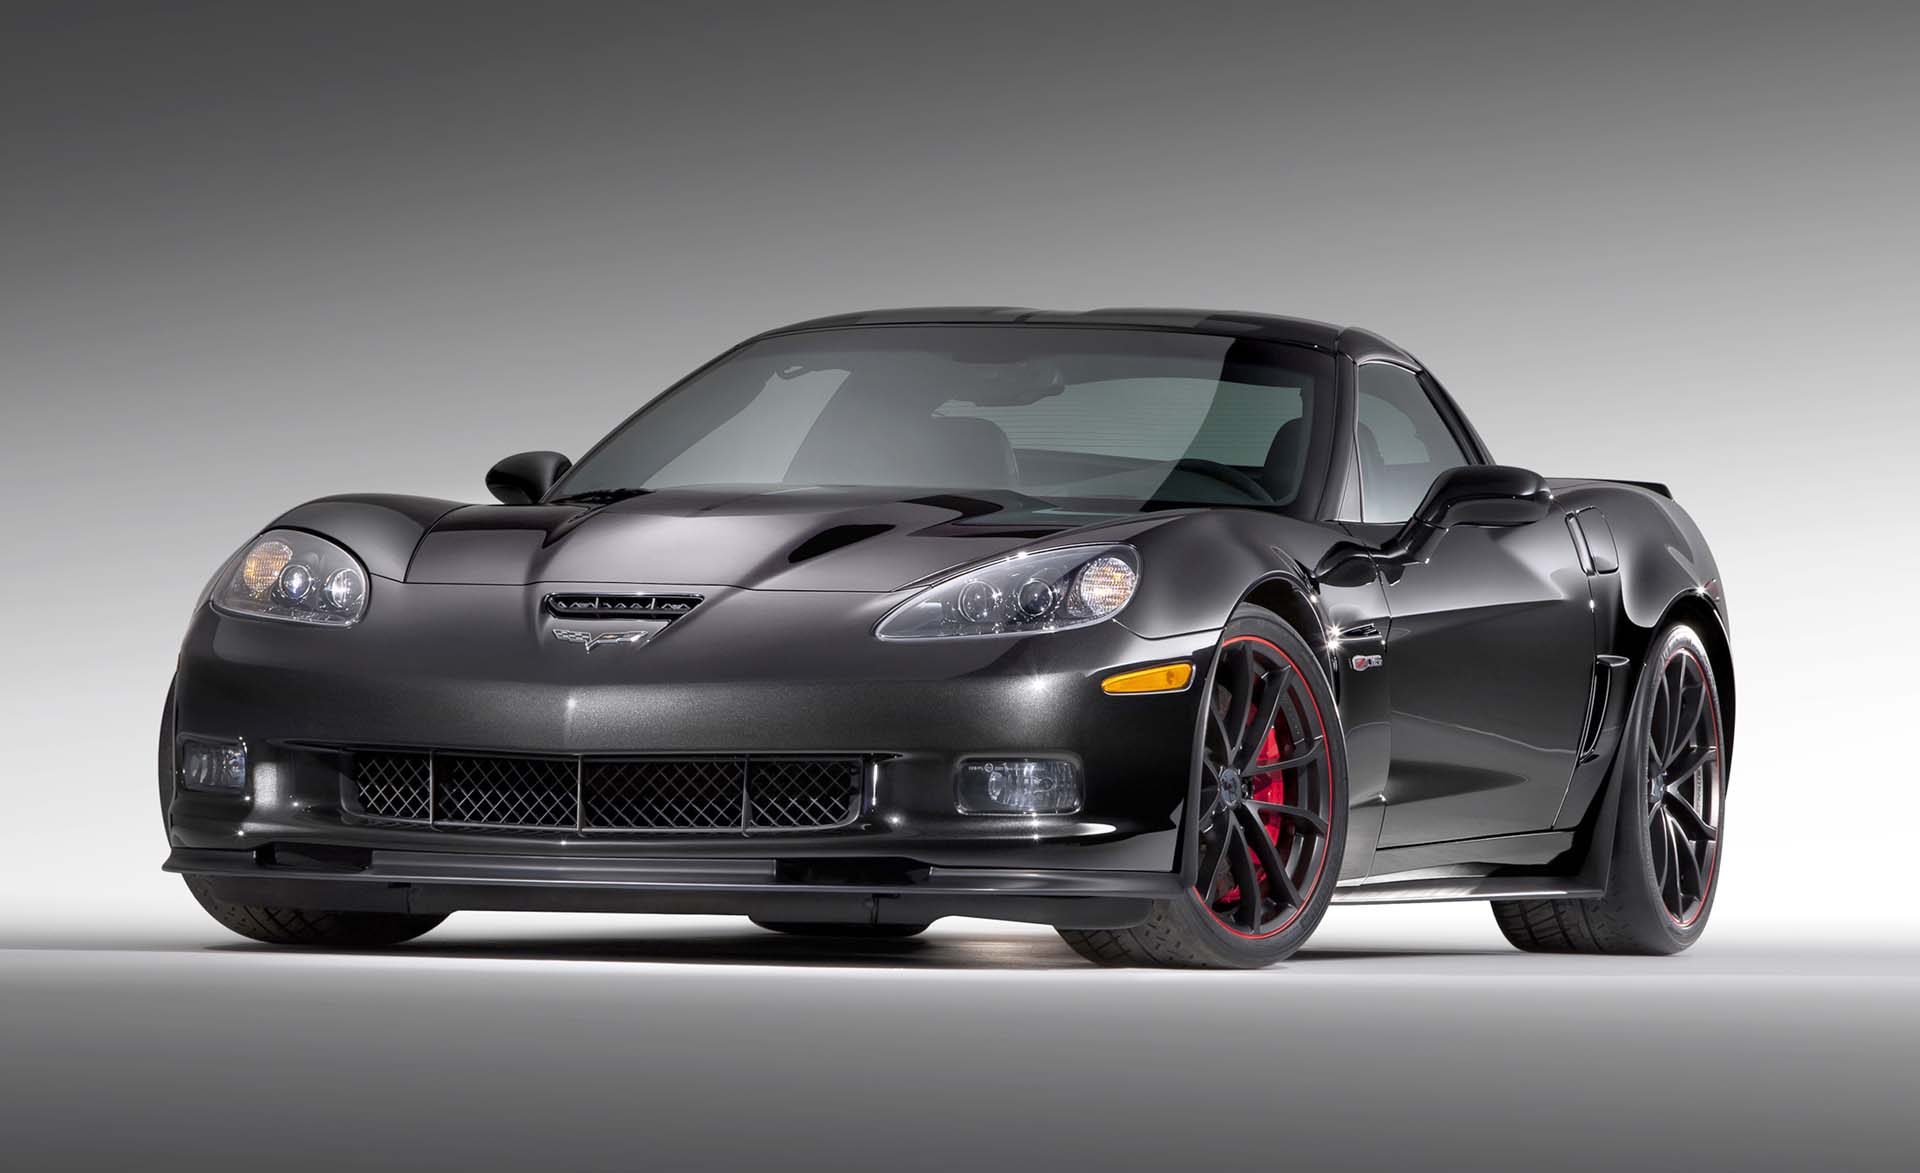 Mid-way through its life cycle, the base C6 Corvette got a 6.2L engine making 430 hp. Even now, with clever traction control and forced induction power in many of its rivals, even the basic 'Vettes are capable of putting down scorching performance numbers.